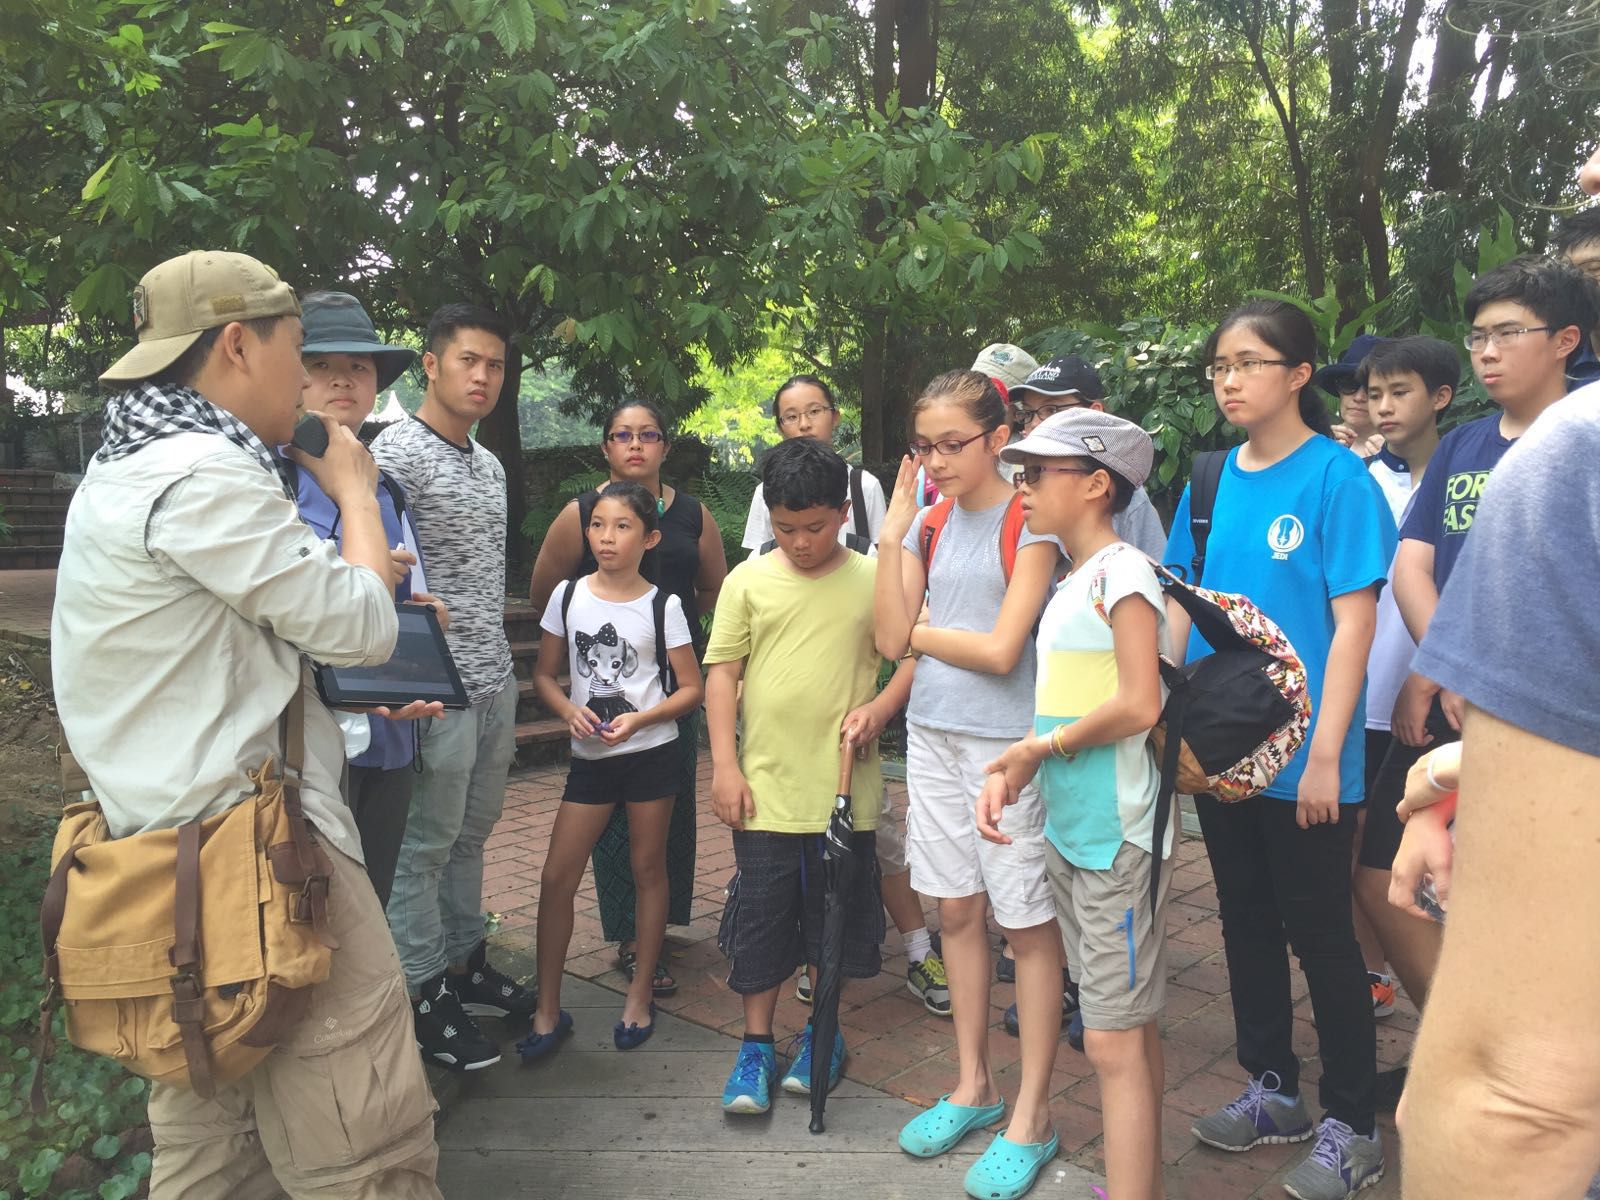 Mr. Michael Ng and Ms. Foo Shu Tieng bringing the Homeschool students on a field trip to Fort Canning. (photo credit: Tan Kay Hoon)